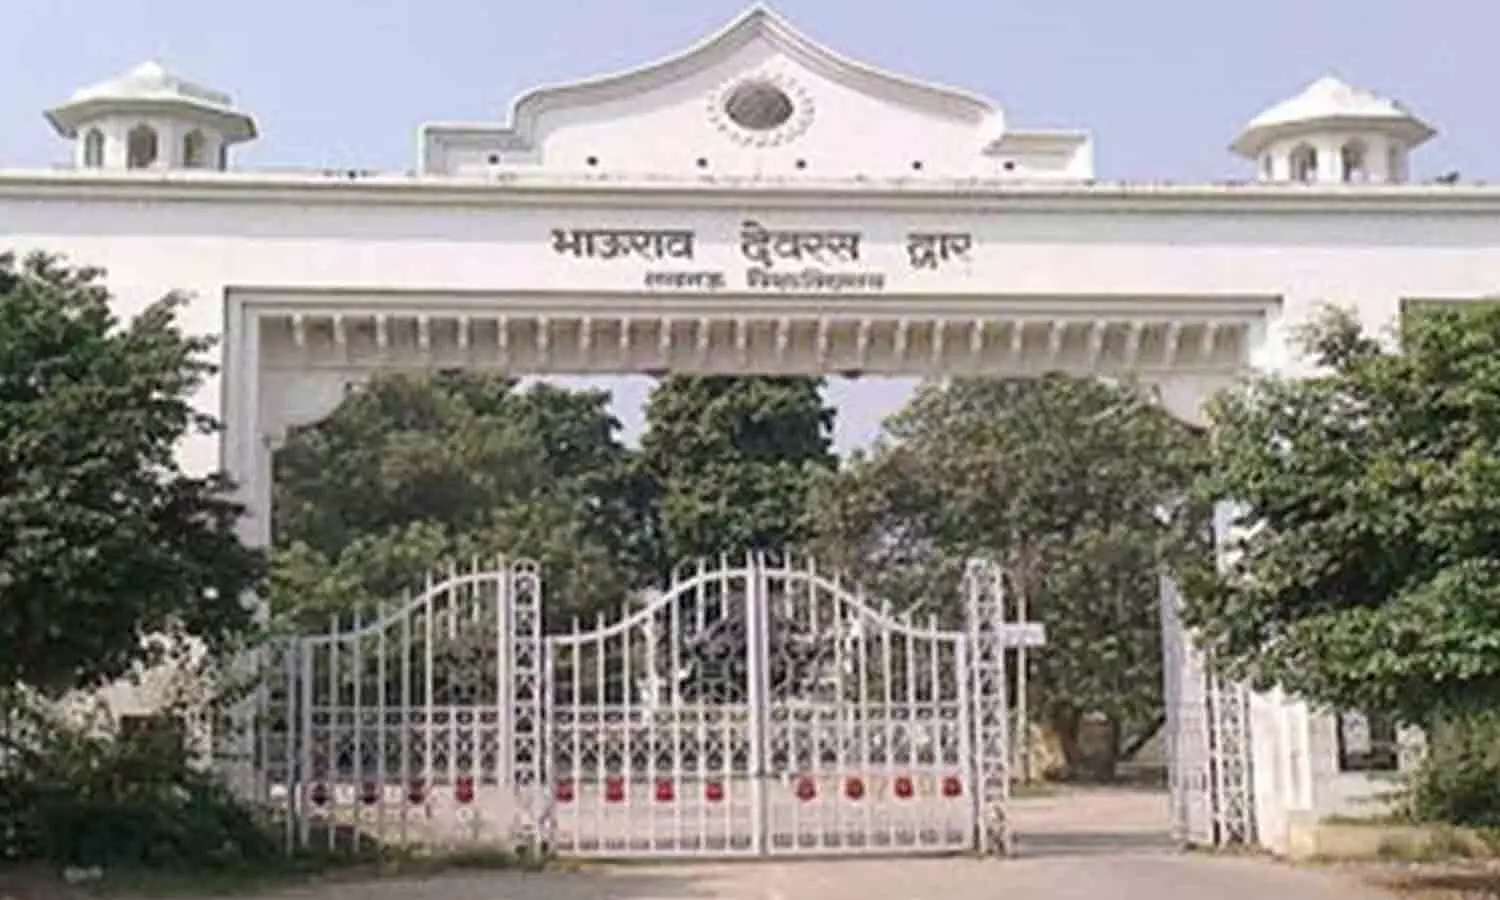 Lucknow University: Application process for PG courses will start from Monday, the last date fixed for June 10